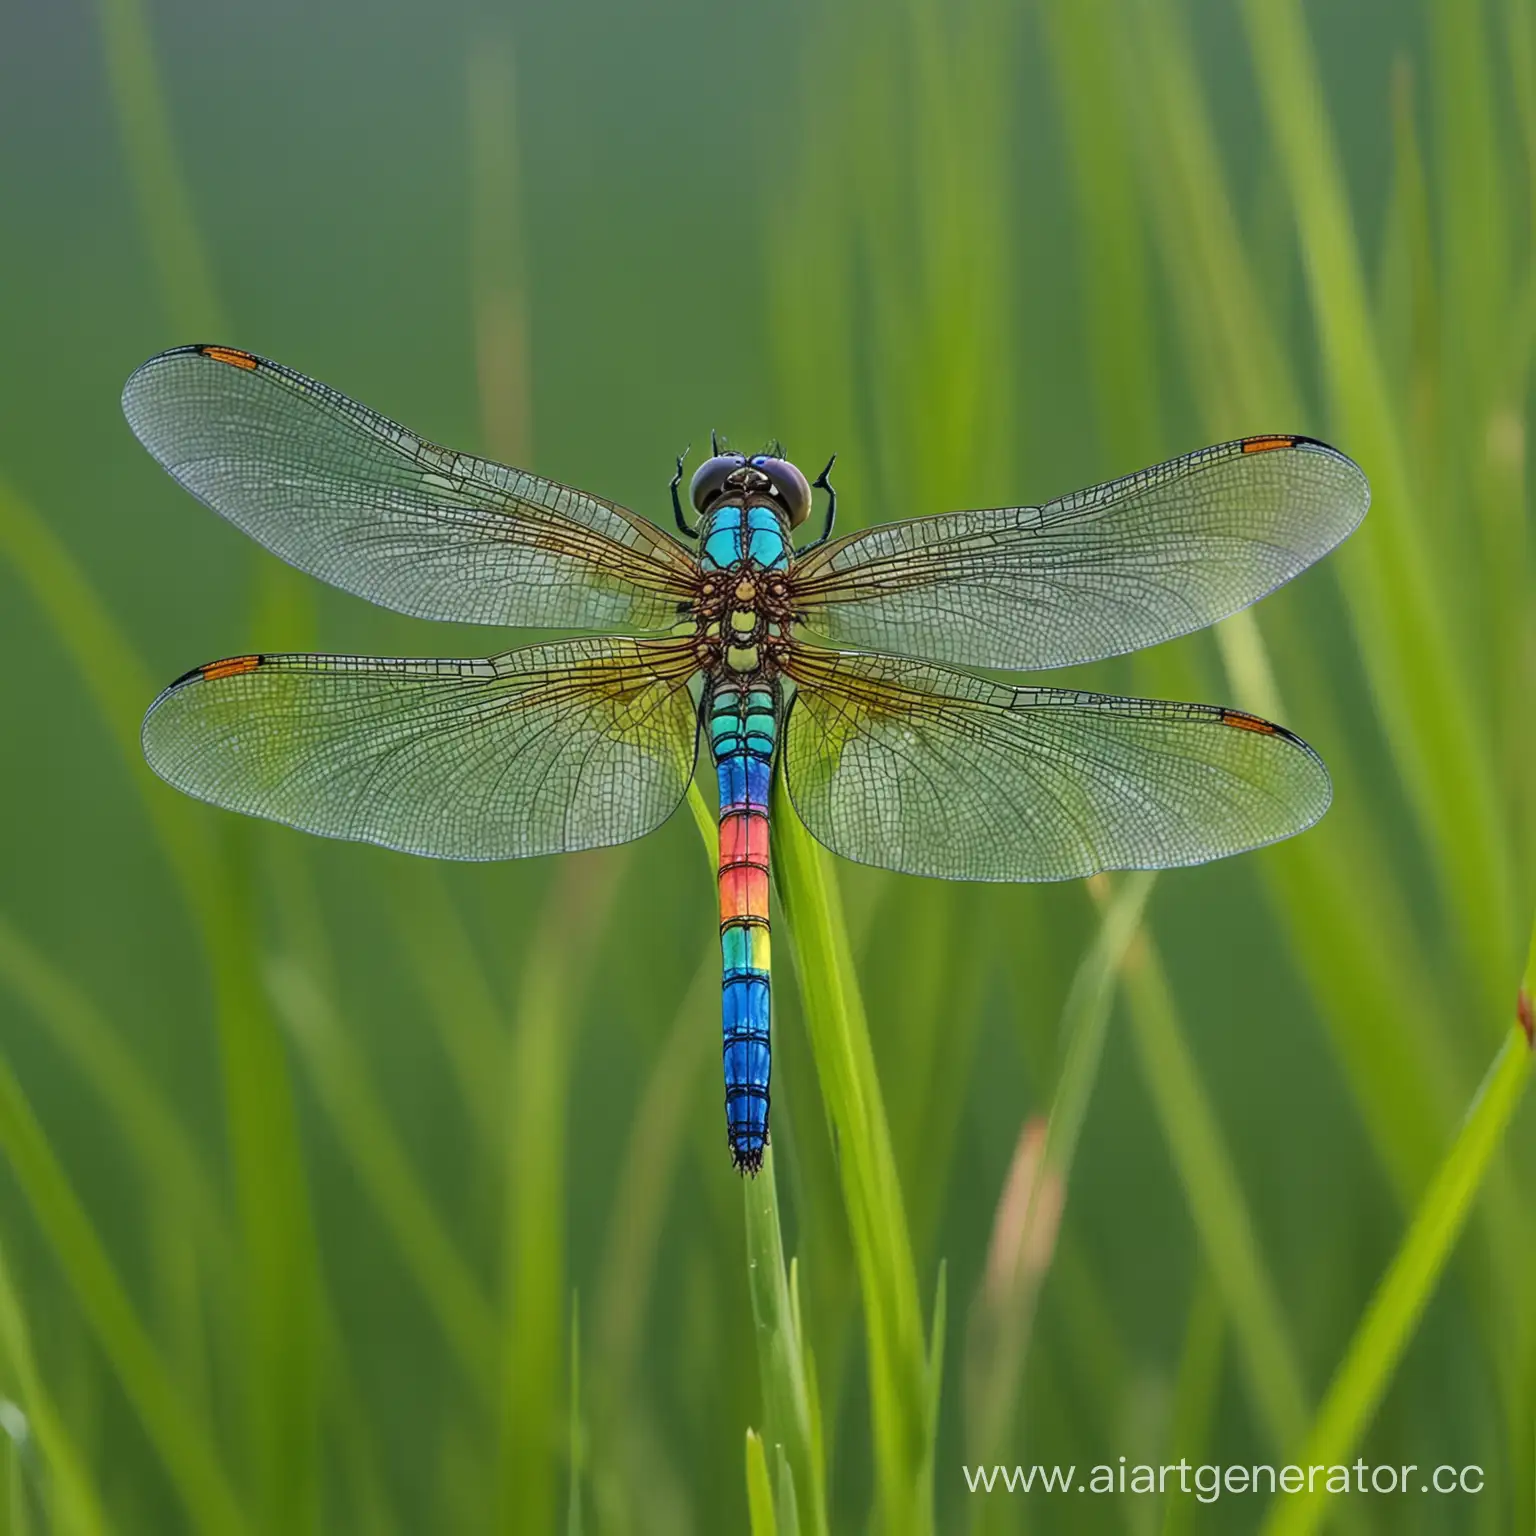 Vibrant-Rainbow-Dragonfly-Perched-on-a-Blade-of-Grass